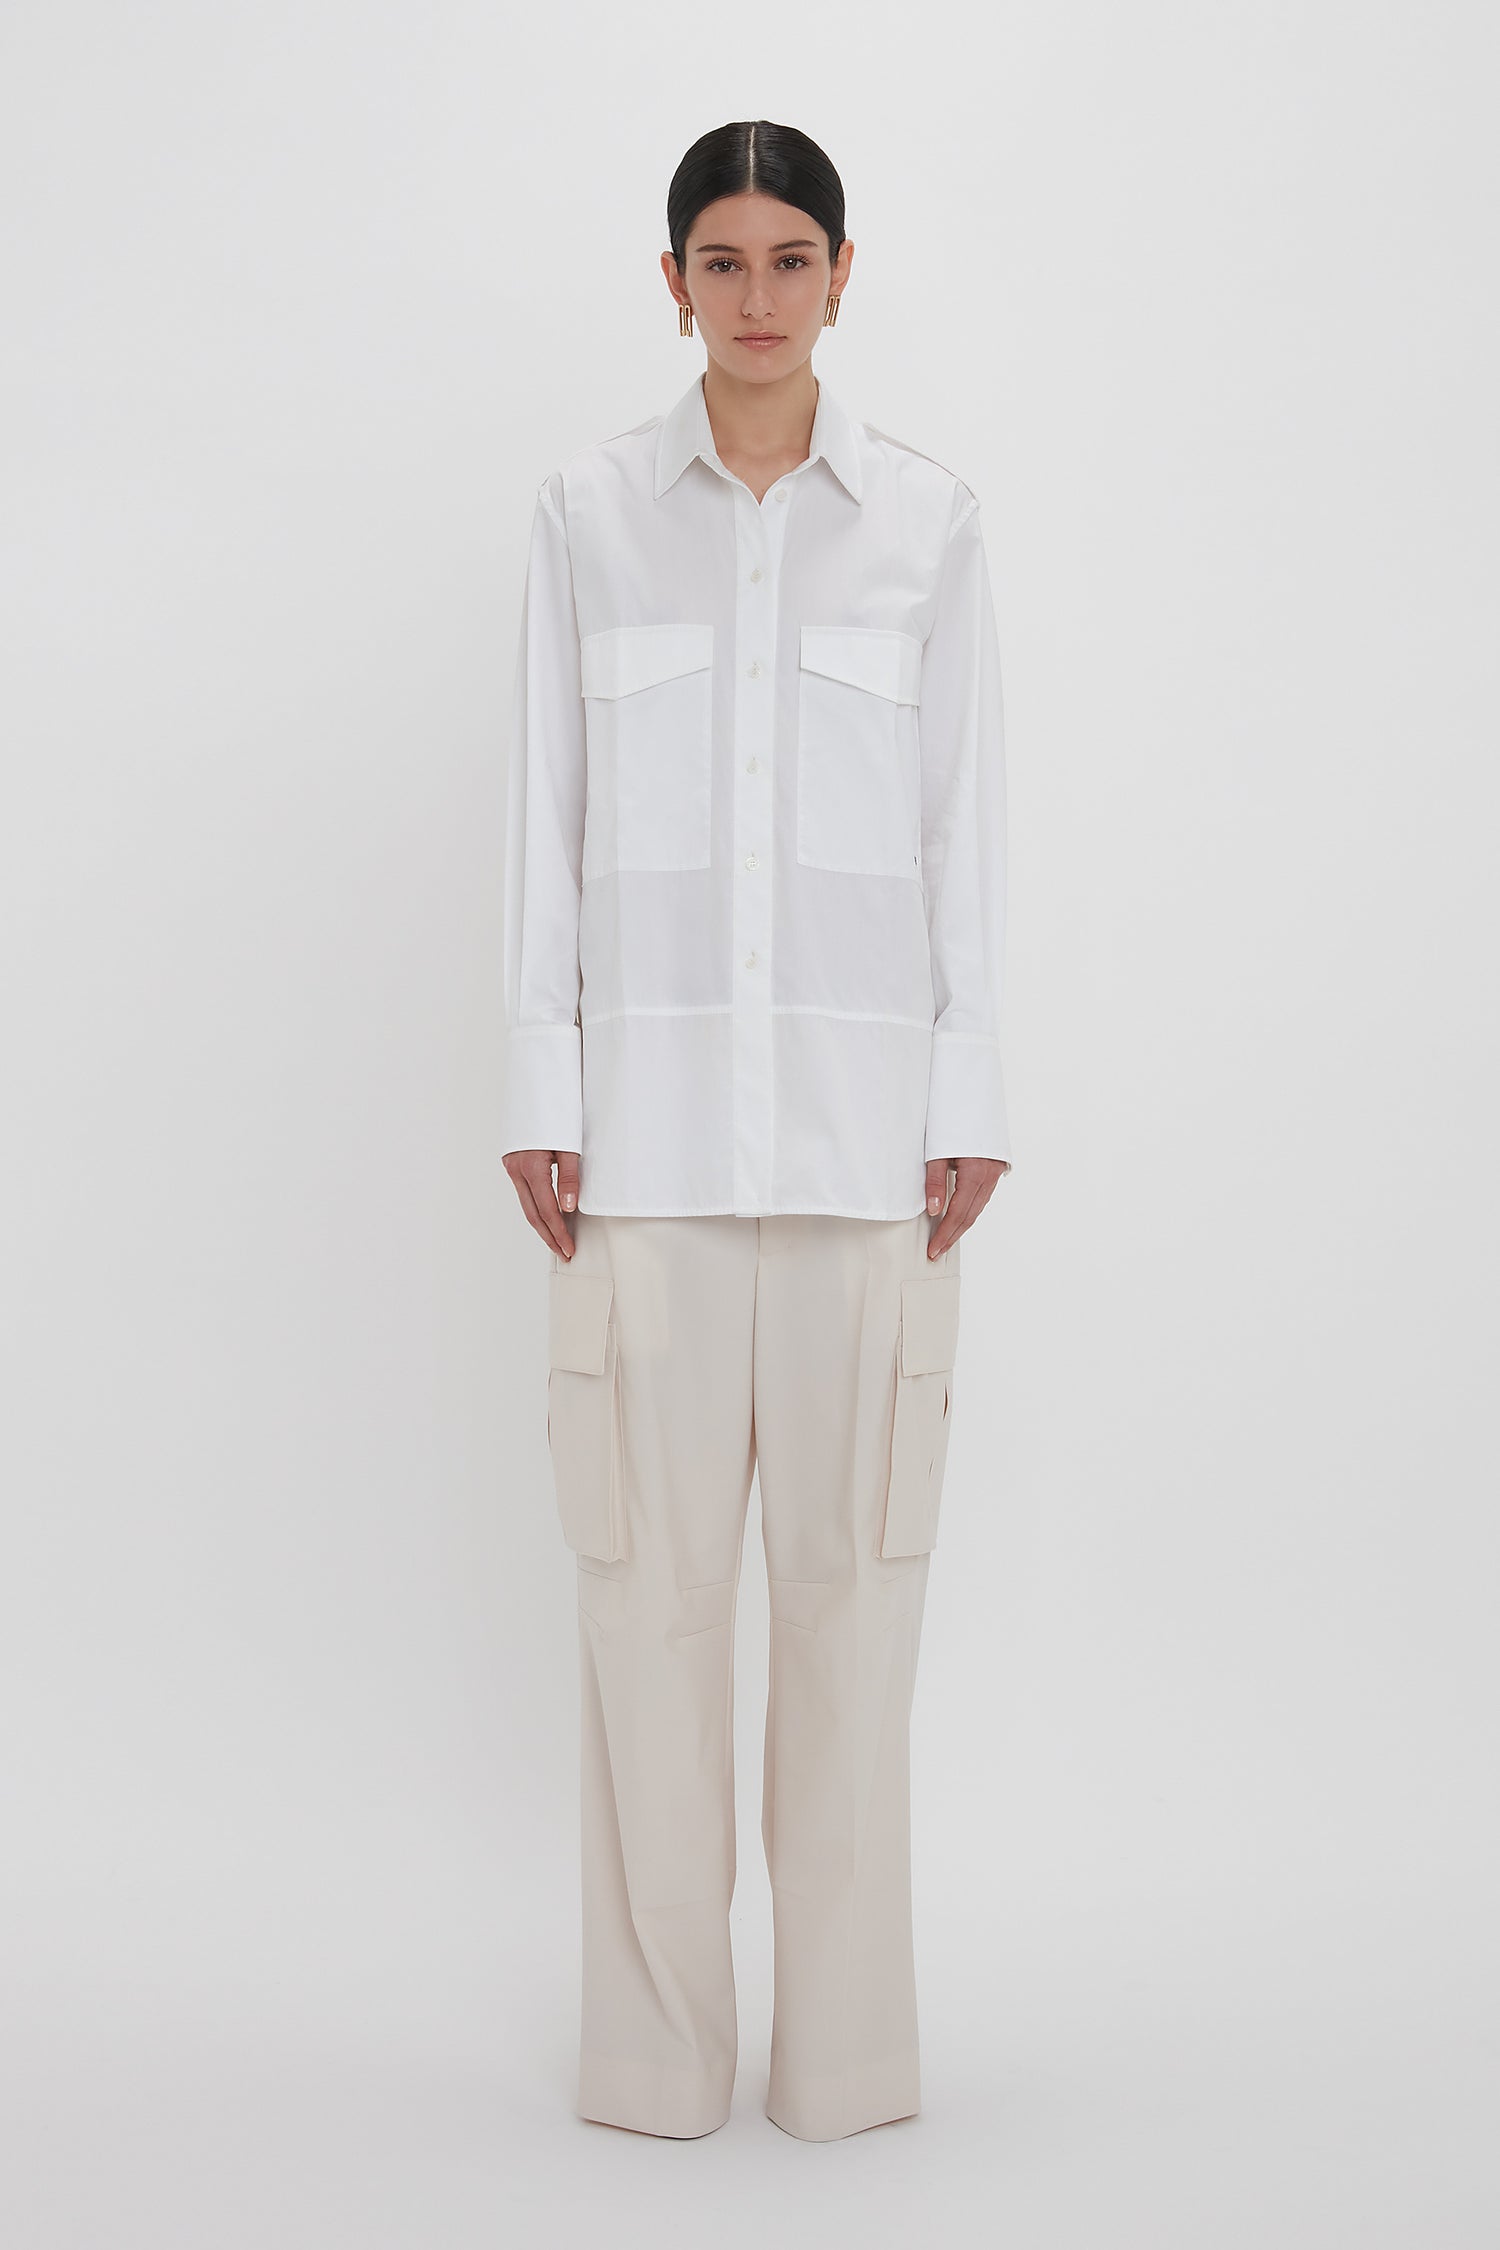 A person wearing an Oversized Pocket Shirt In White by Victoria Beckham made from organic cotton and beige cargo pants, standing against a plain white background.